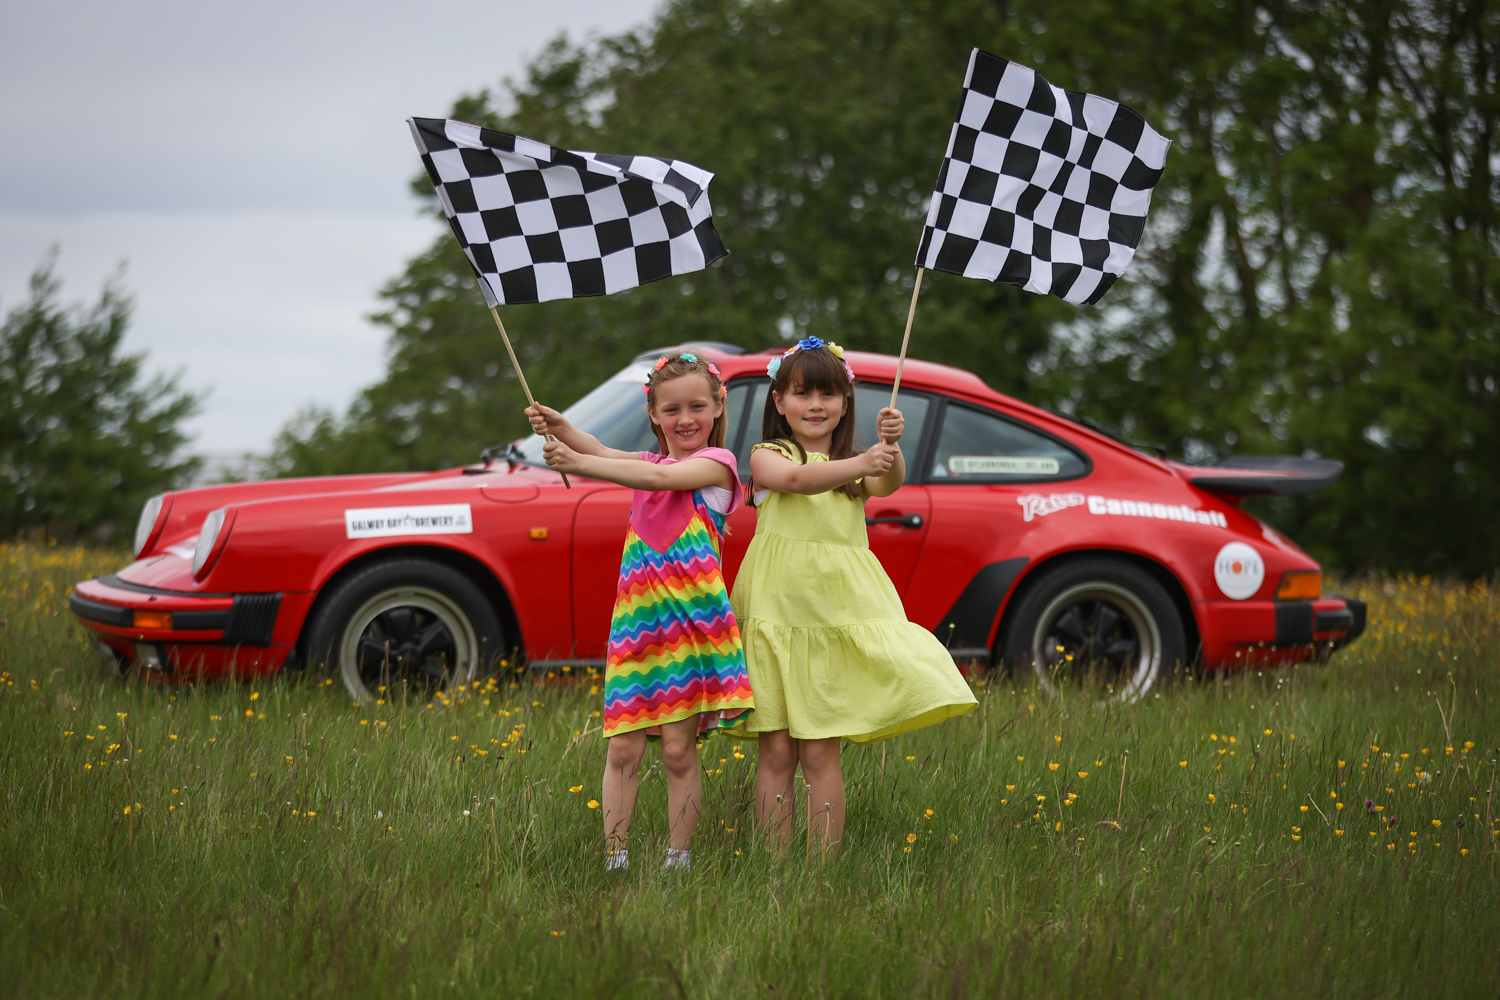 Car News | Retro Cannonball is coming back to Ireland